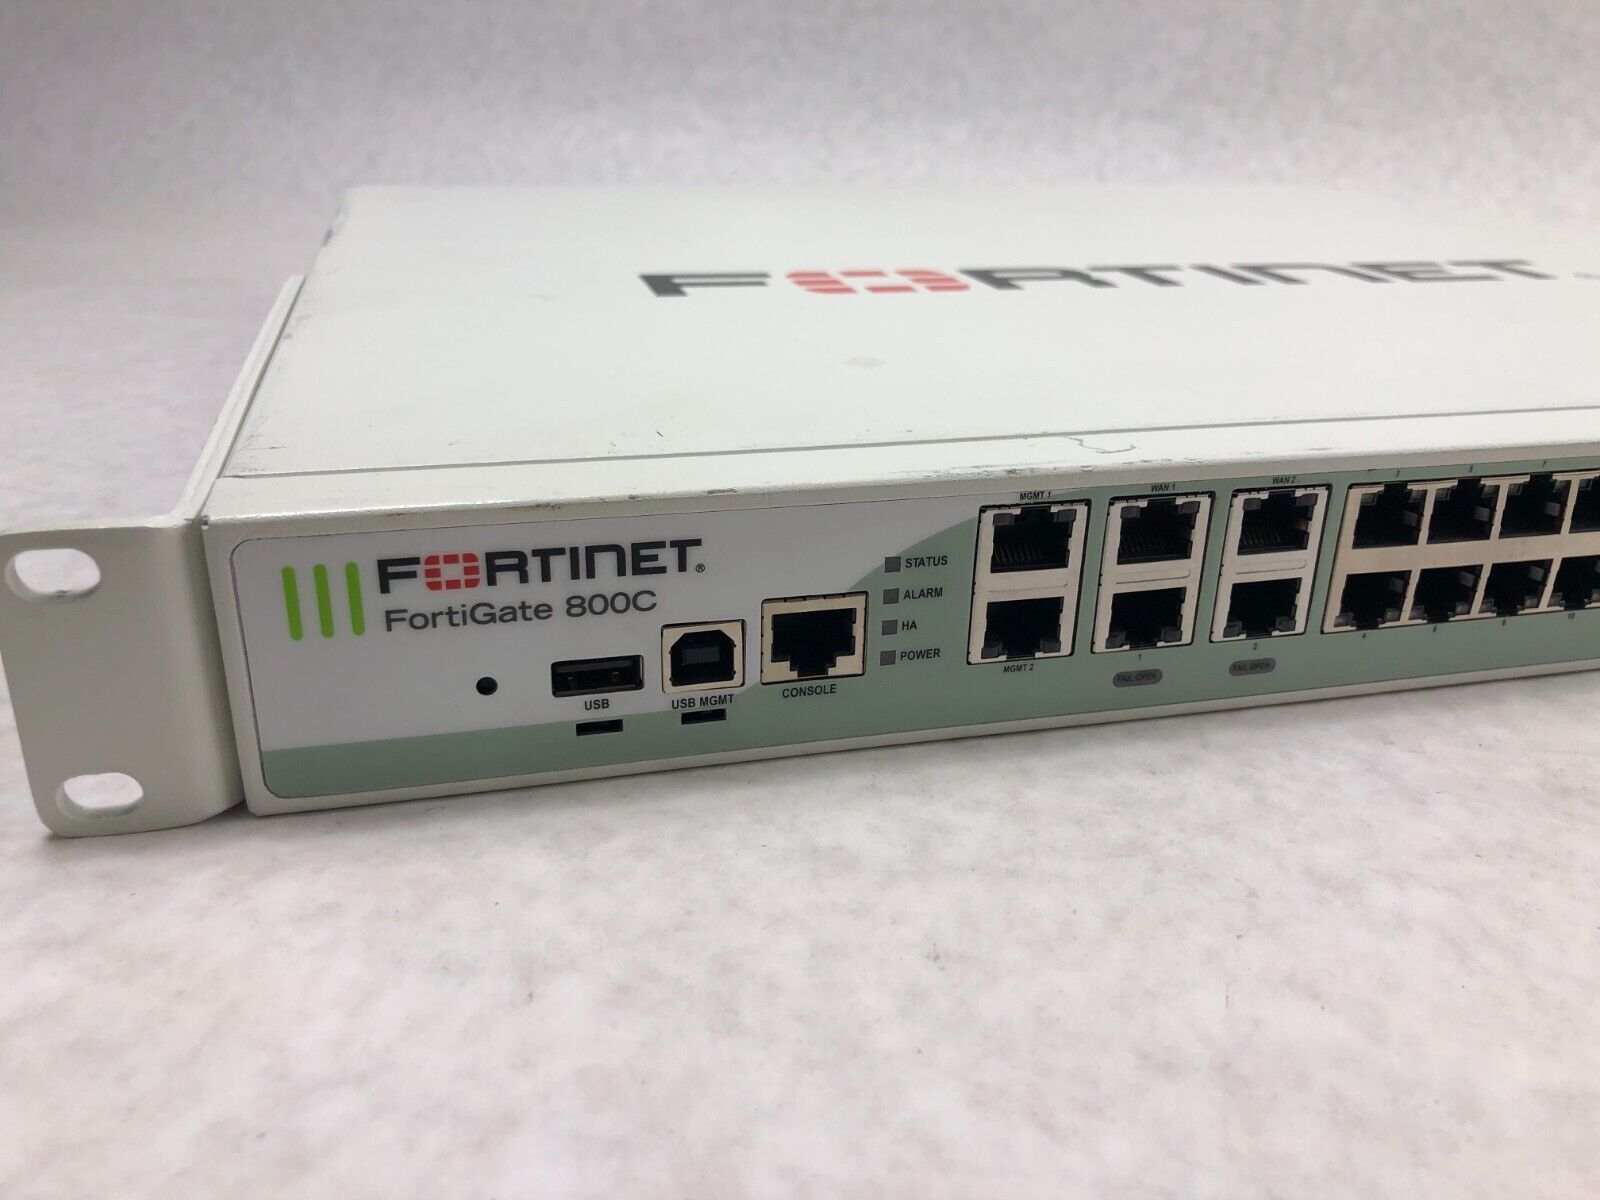 Fortinet Rack Mountable FortiGate 800C FireWall Security FG-800C